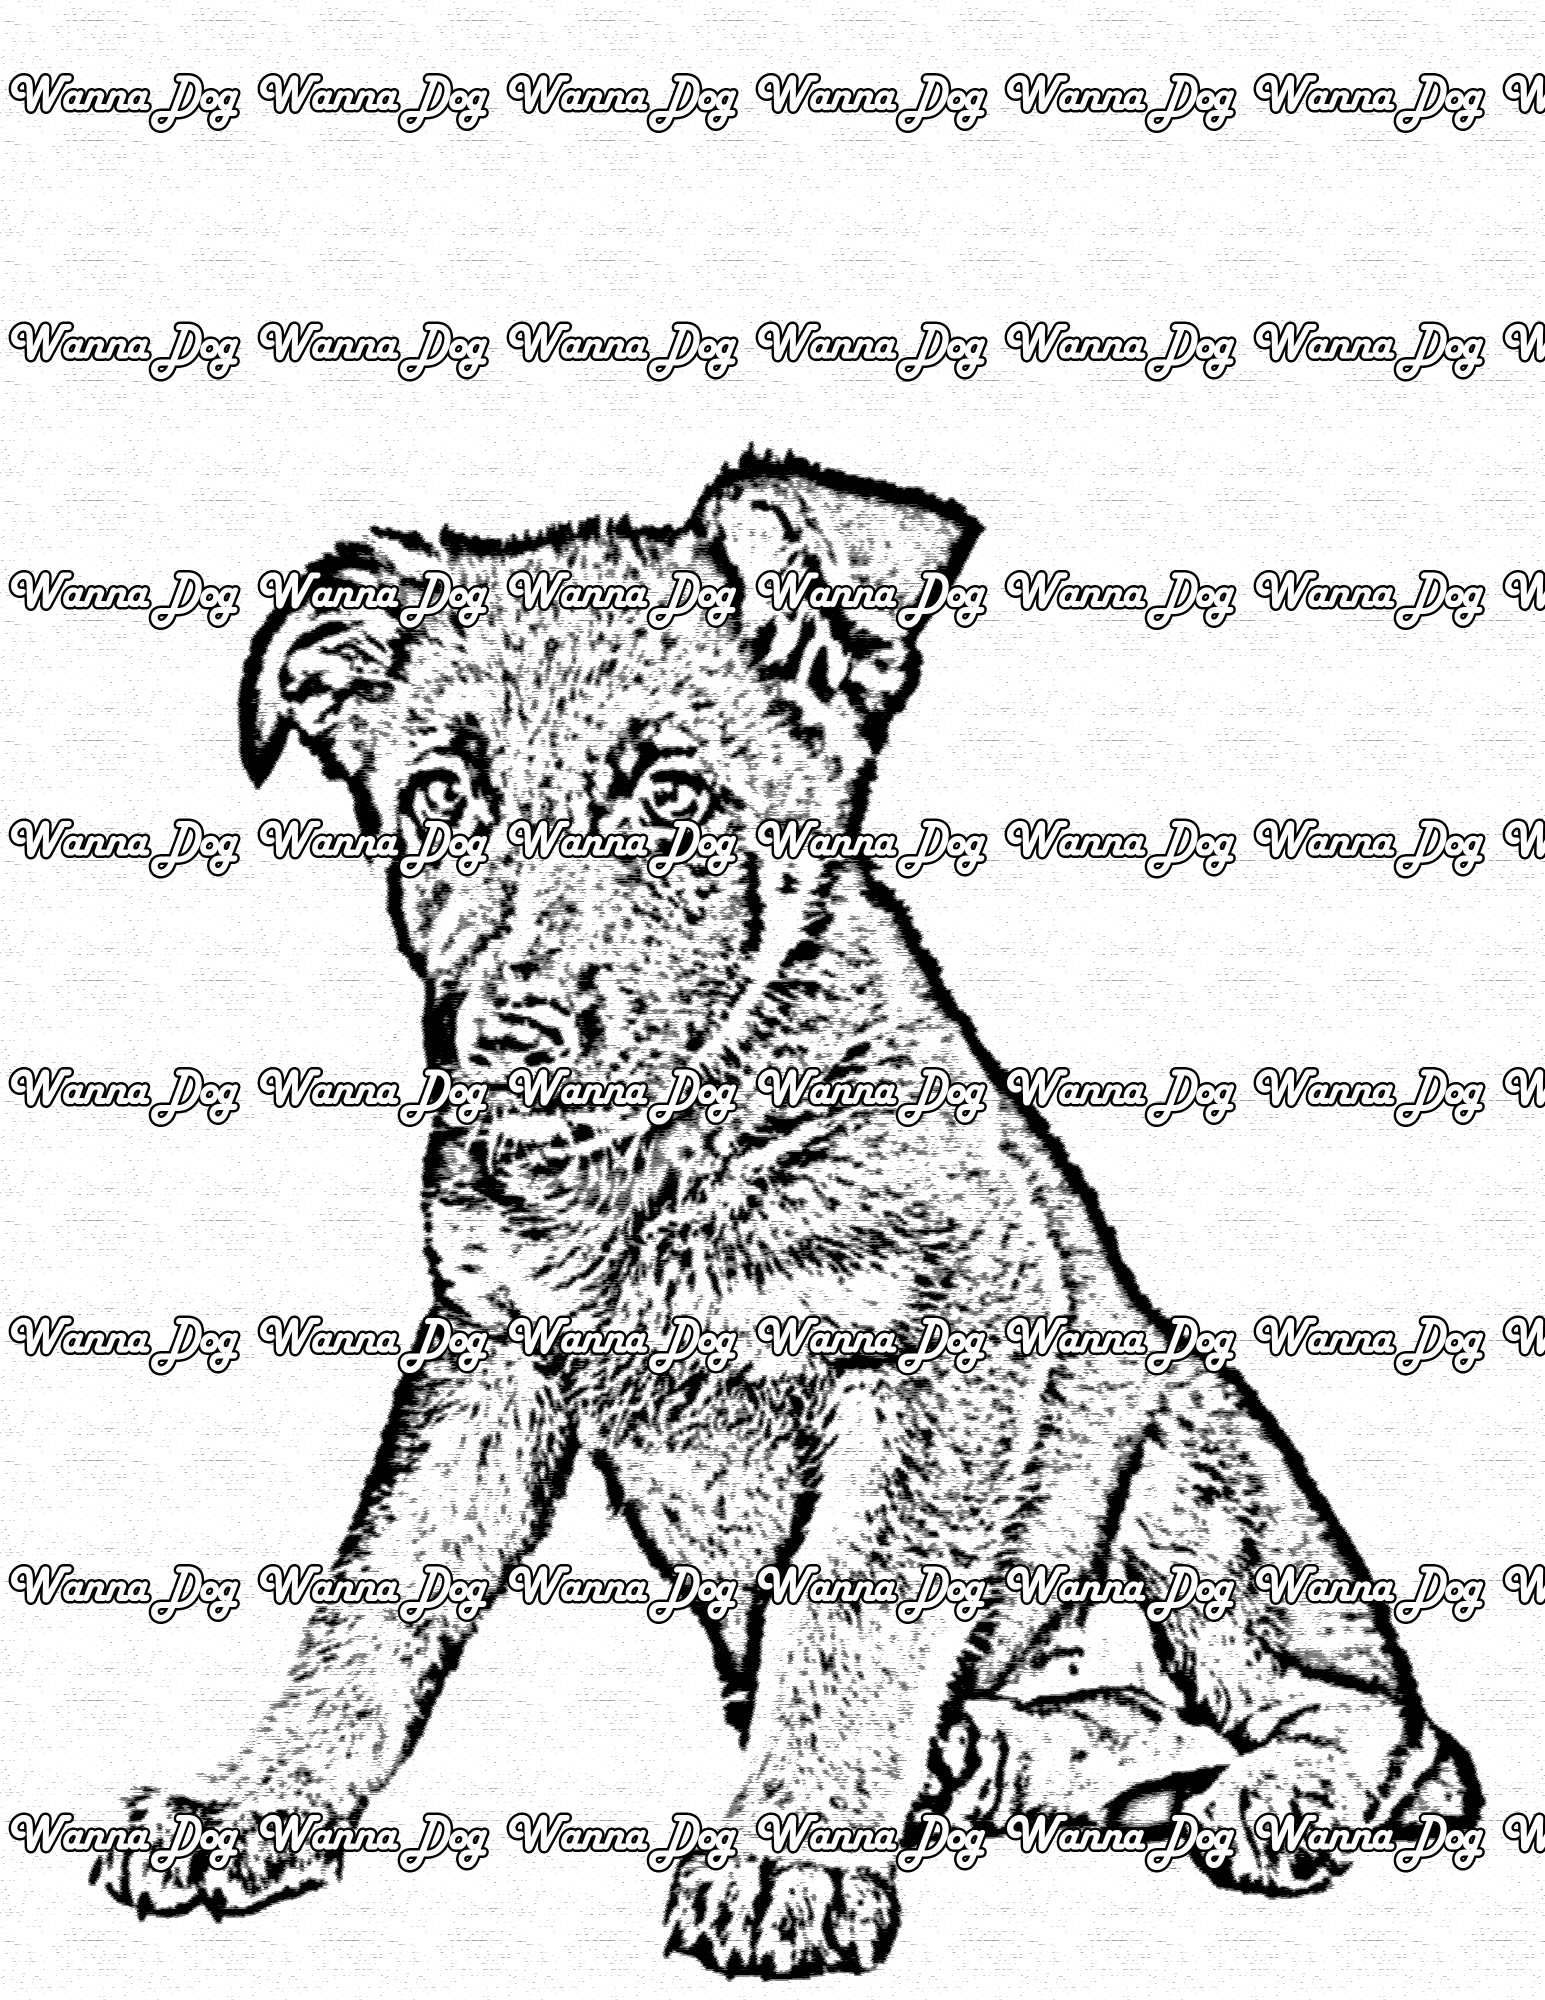 German Shepherd Puppy Coloring Pages of a German Shepherd Puppy sitting down and looking at the camera